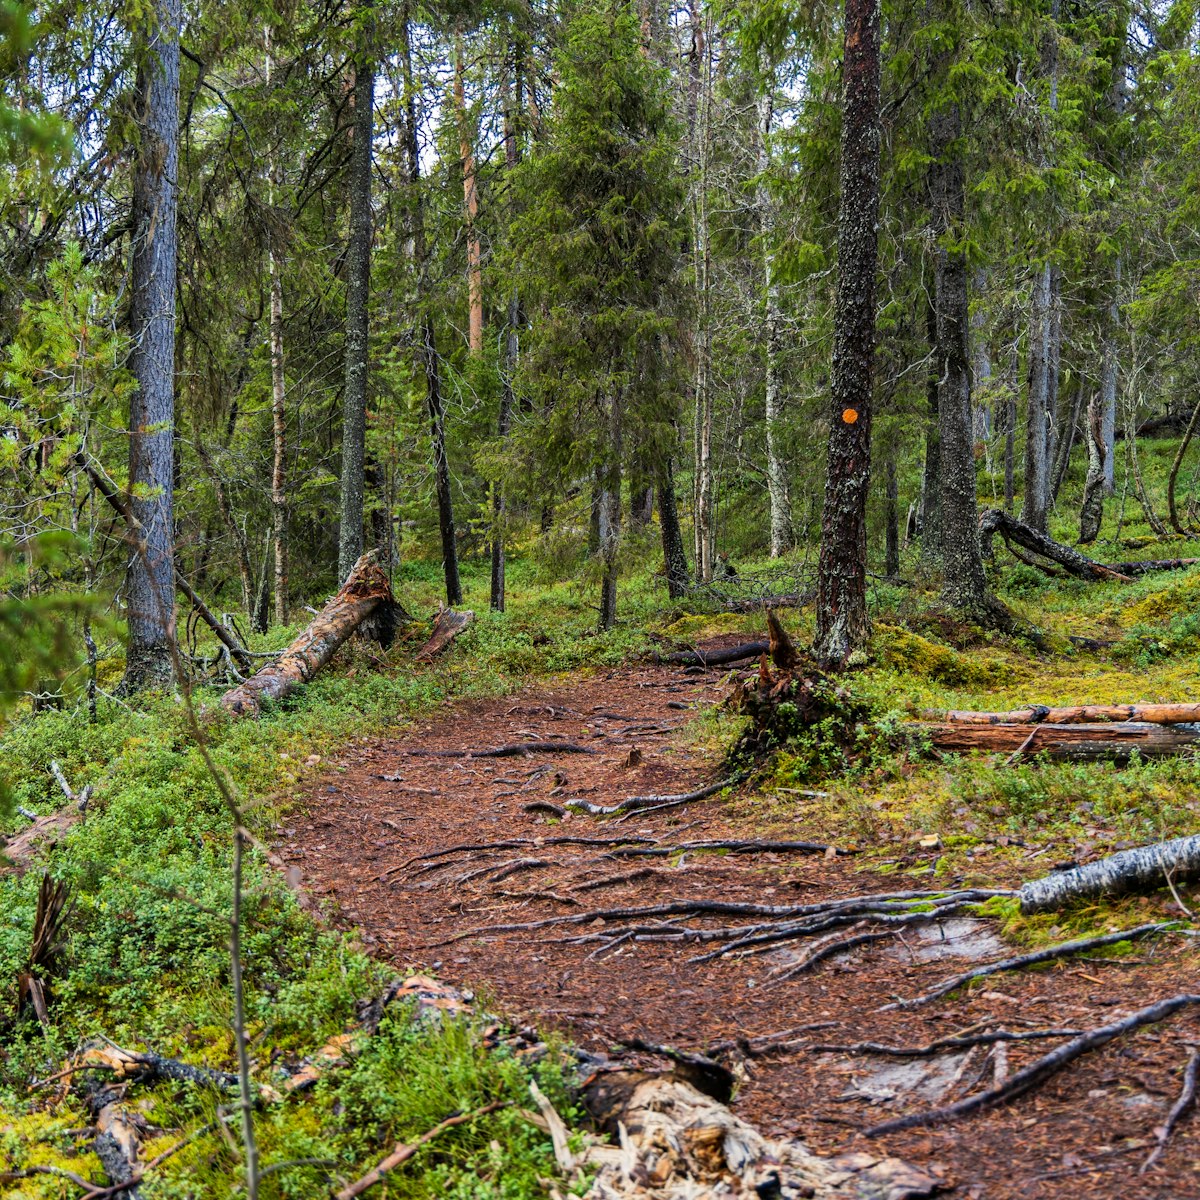 The Auttikongas Forest in the municipality of Rovaniemi in Finland.